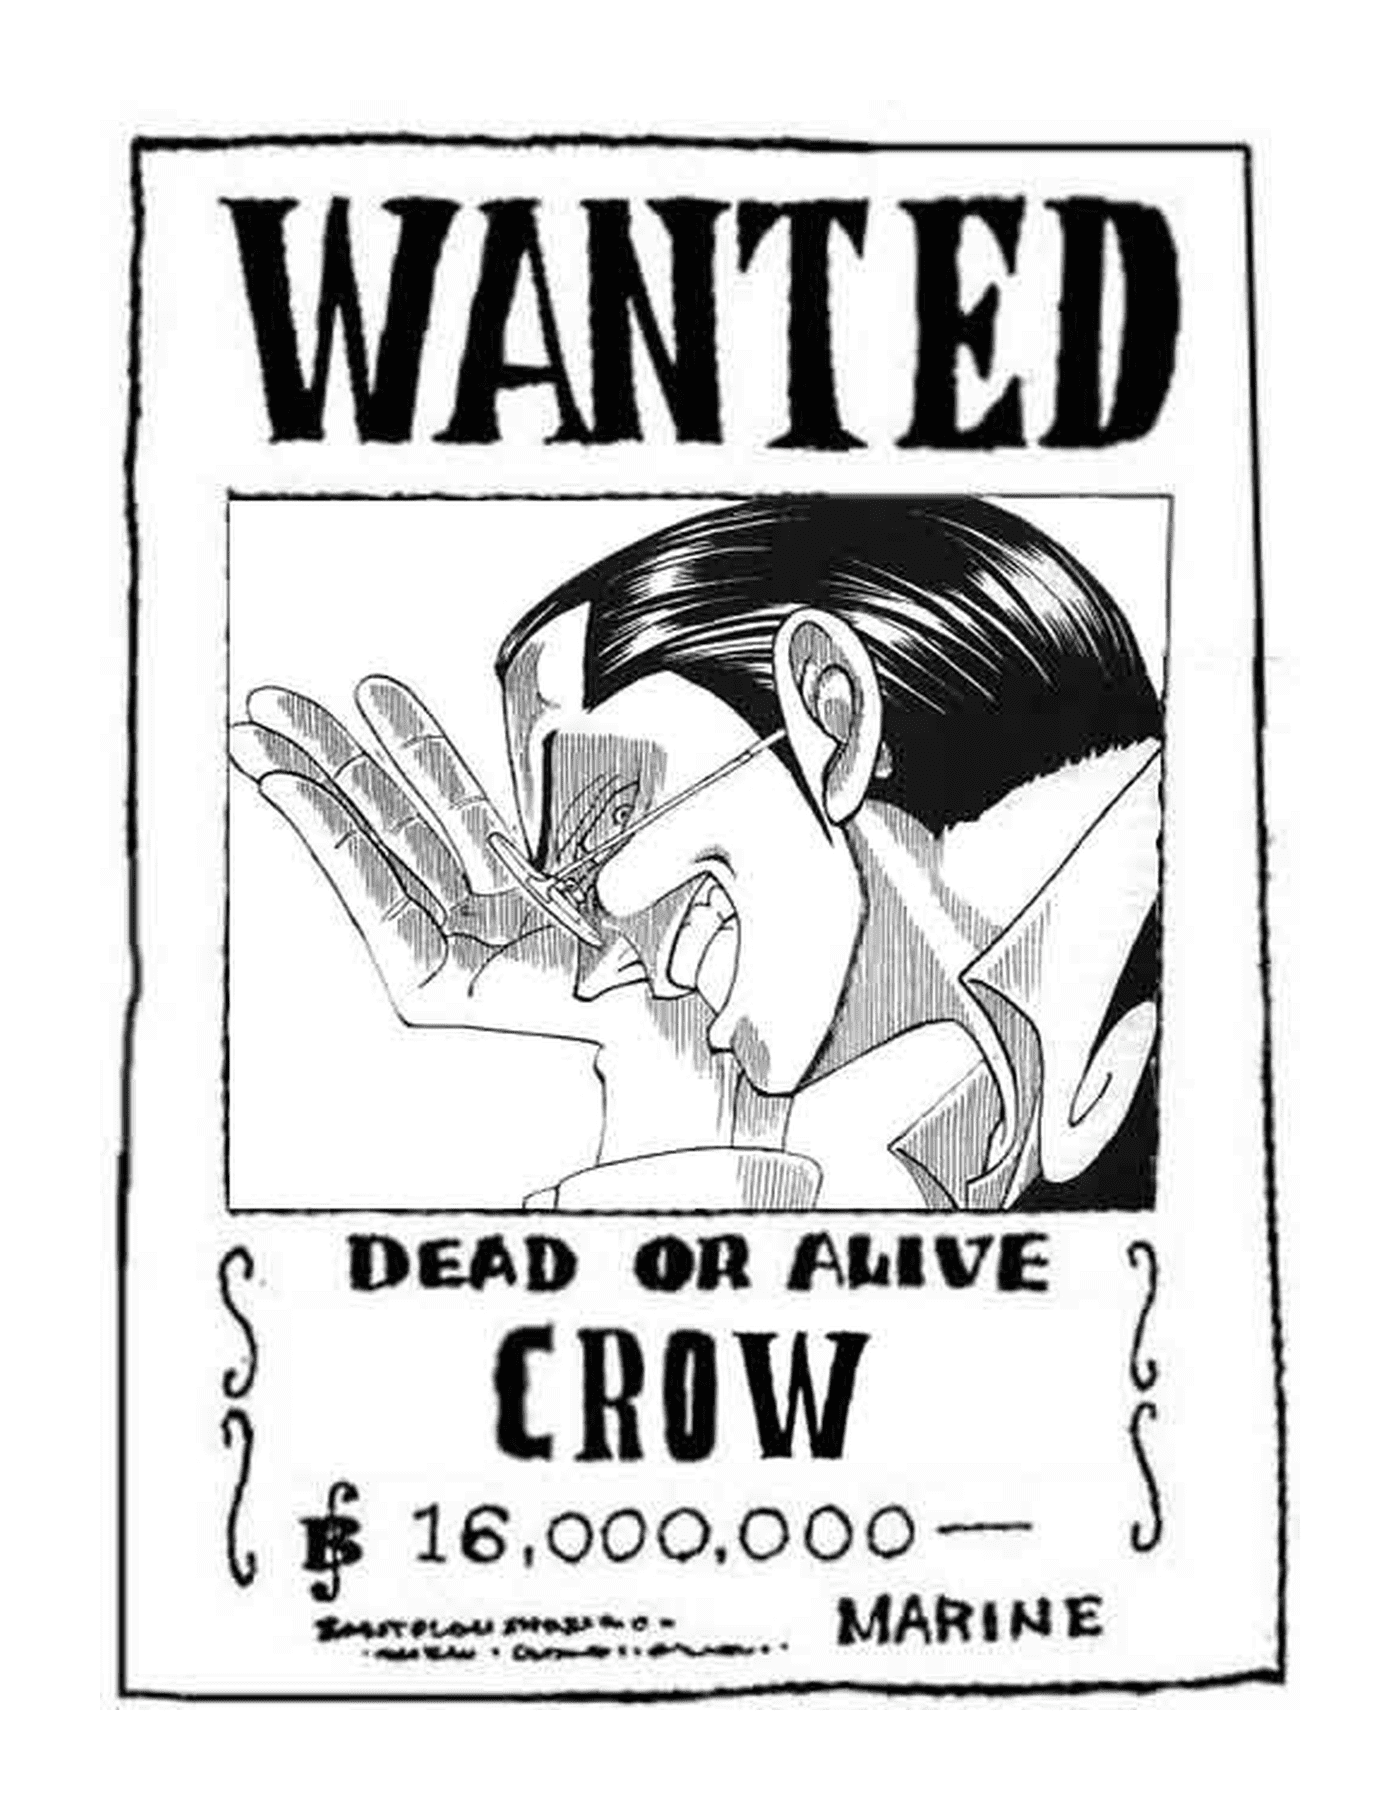  Wanted Crow, dead or alive 